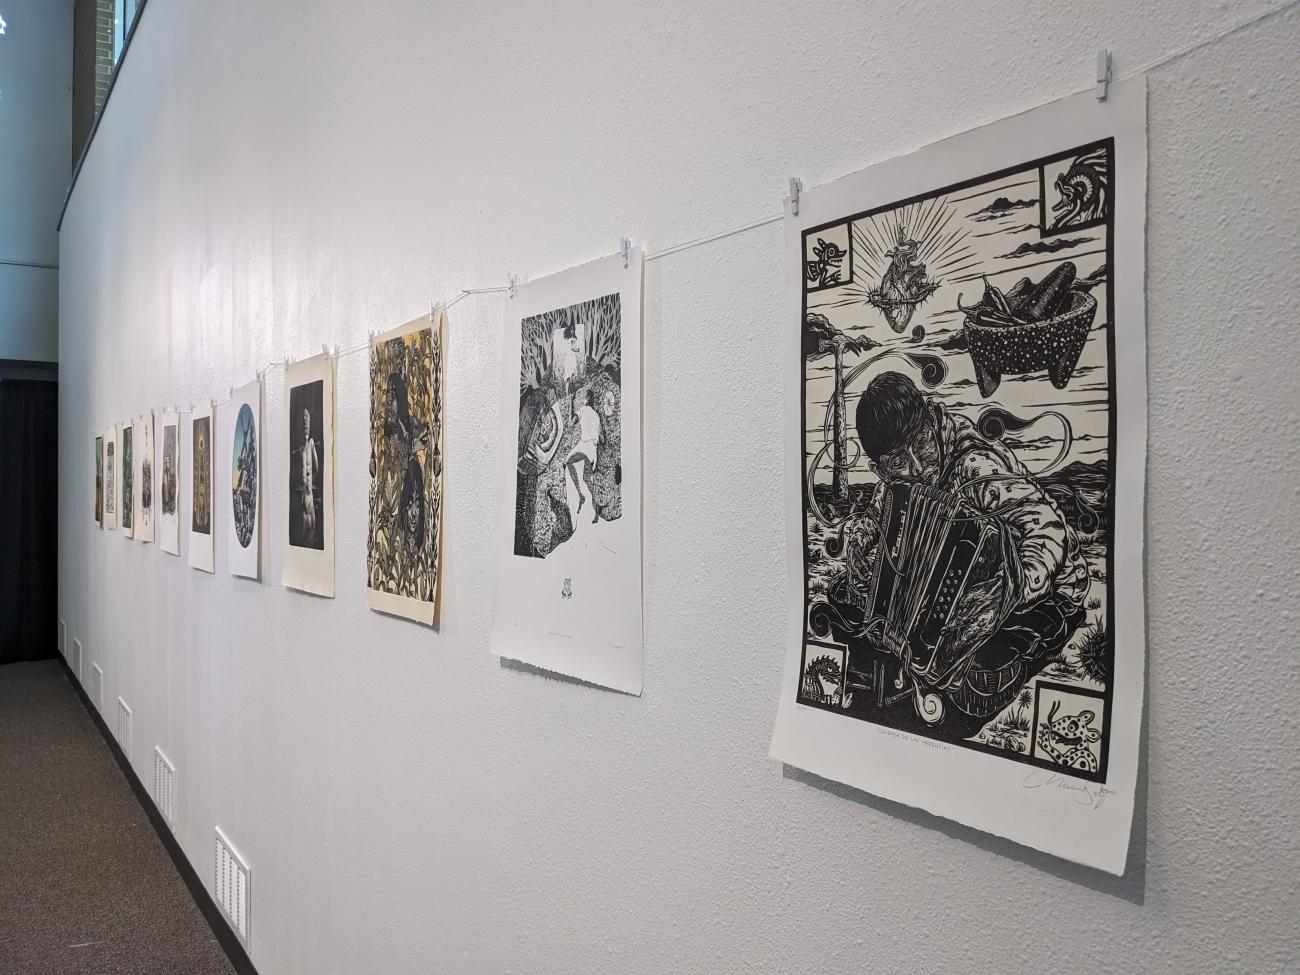 Pieces from the Printmaking Exhibition exhibit